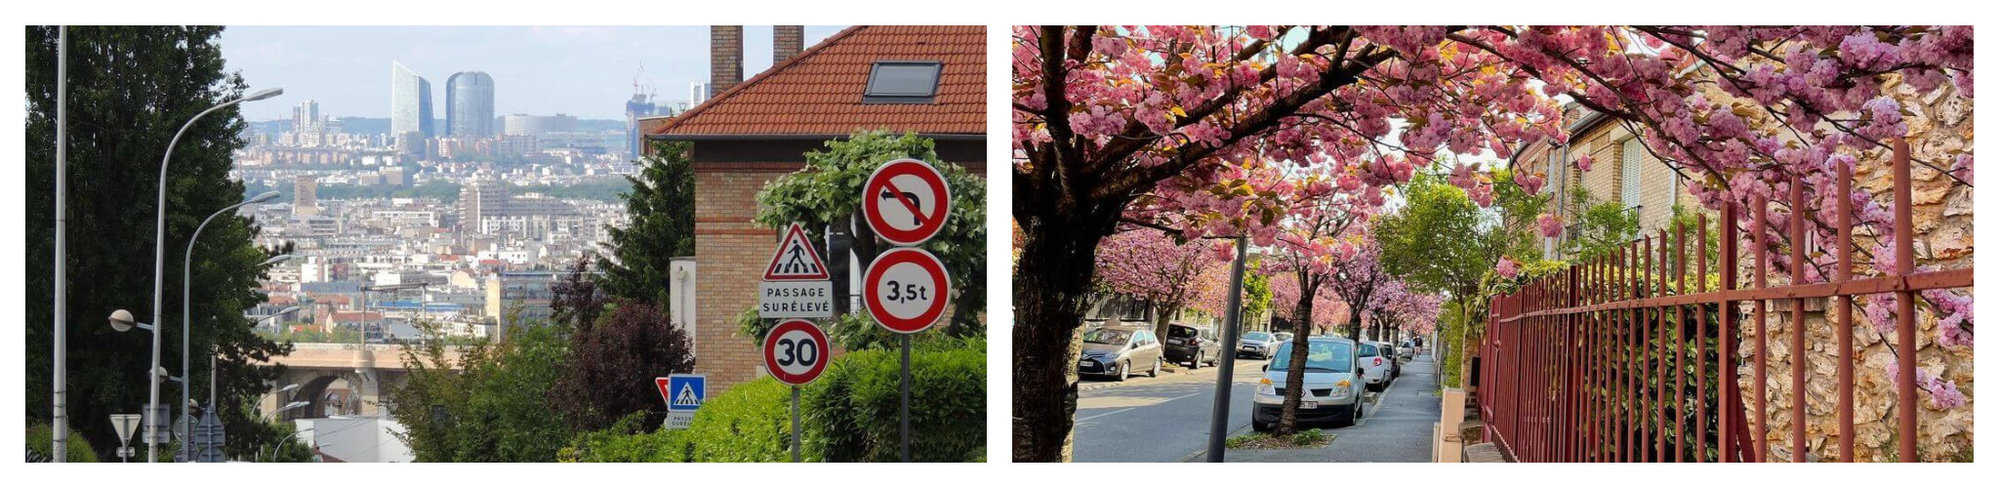 On the left is a suburban tree-lined street with views of gray and beige buildings. On the left is a suburban avenue lined with cars, cherry blossoms, and red house gates.